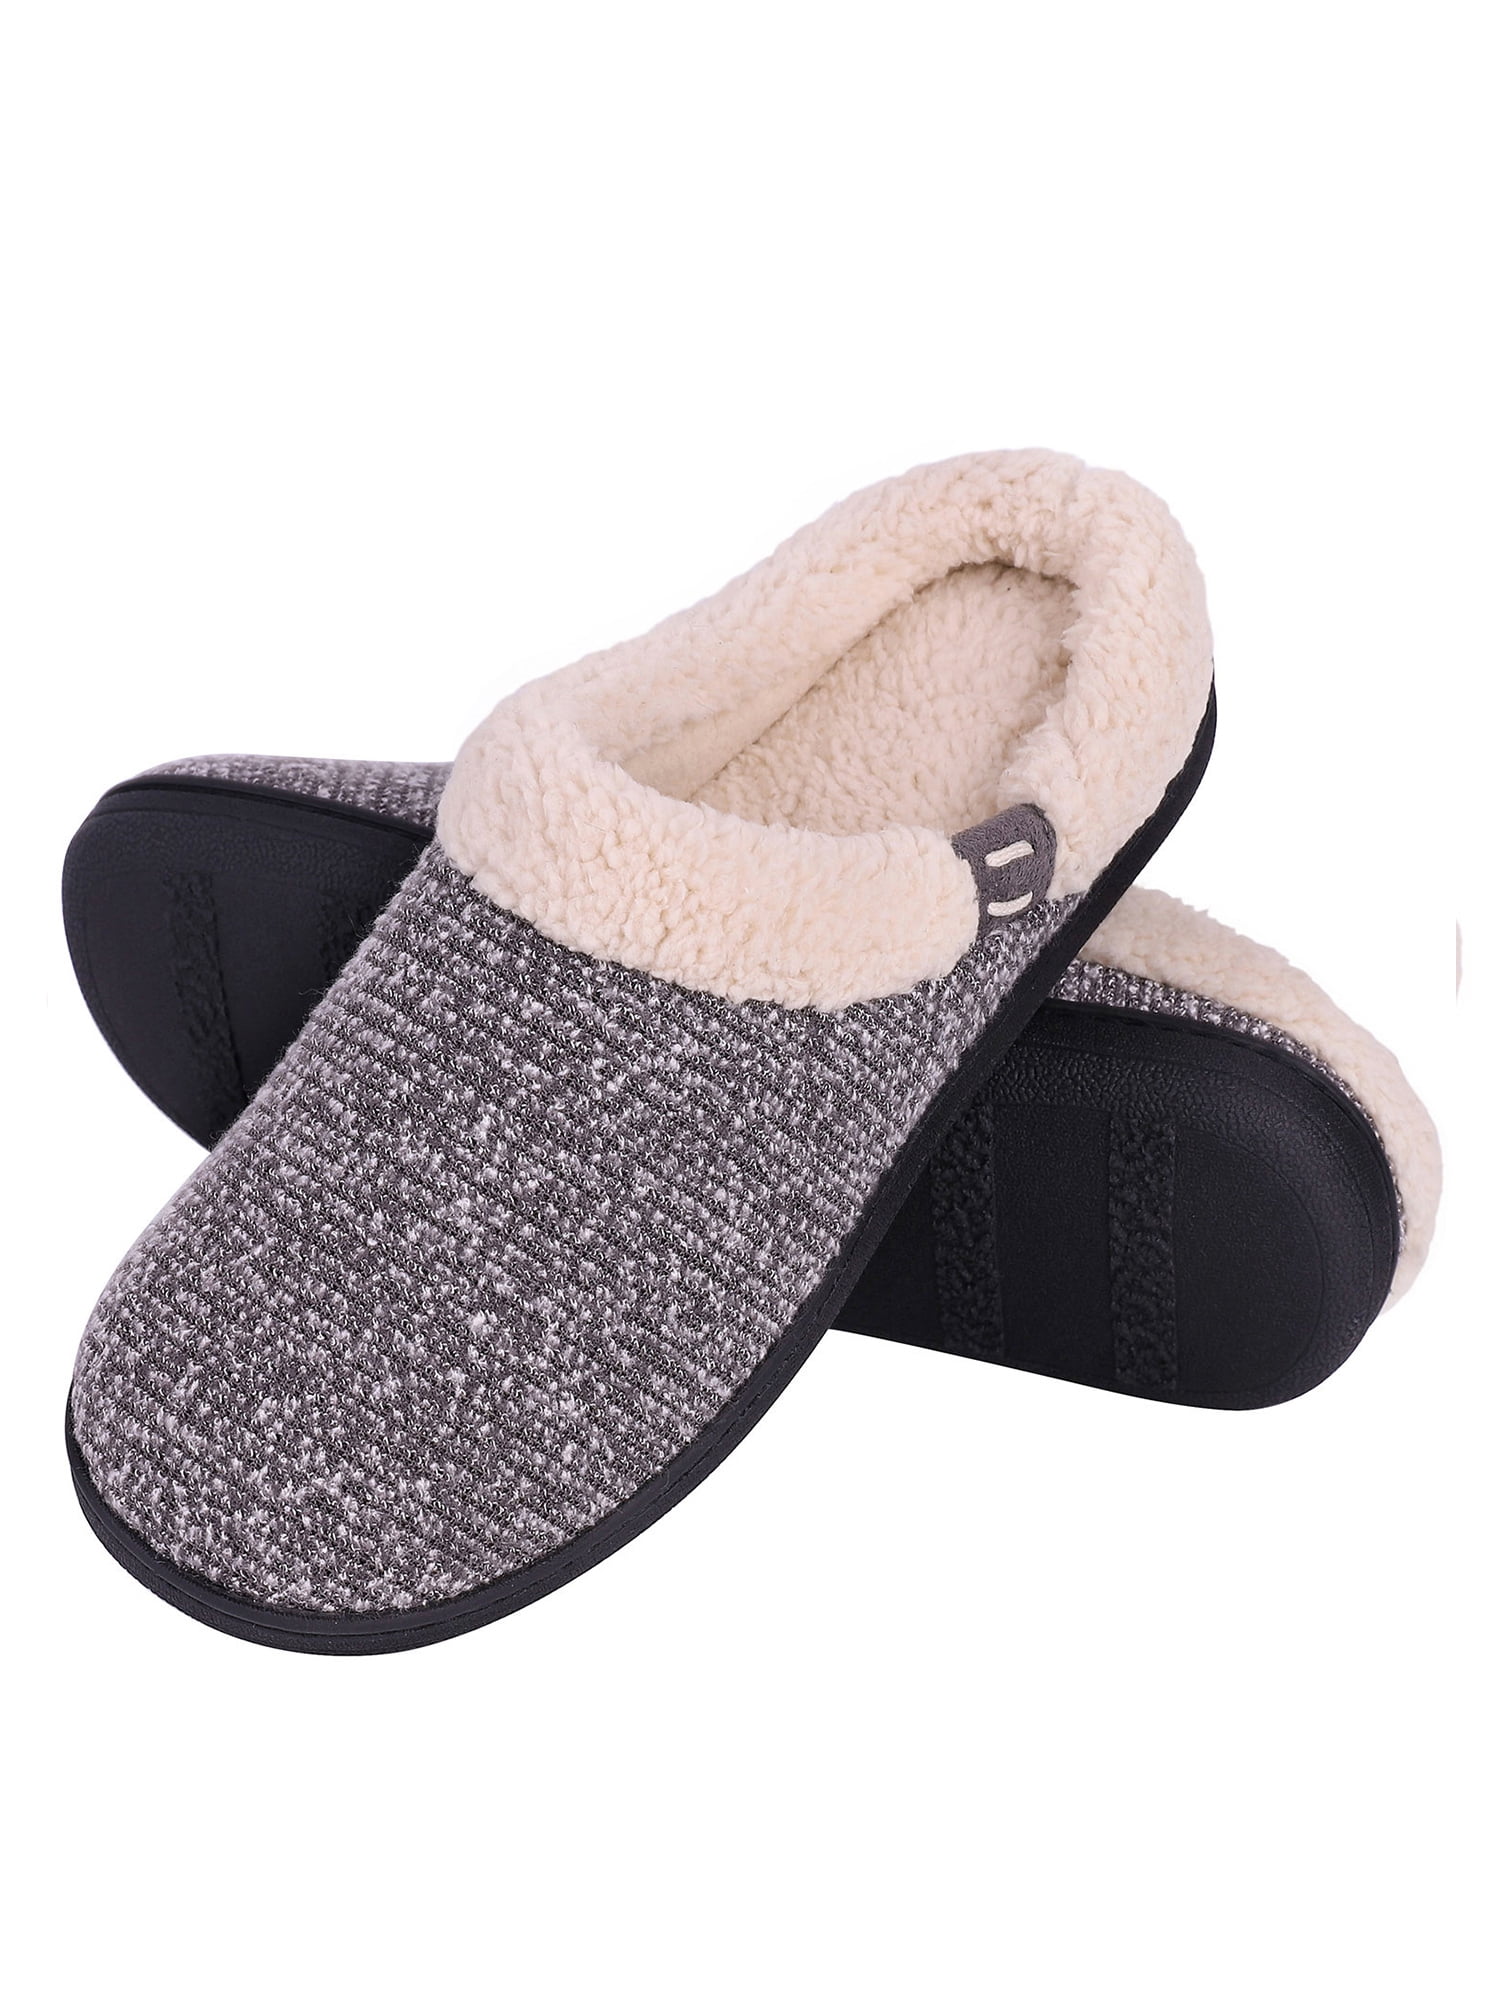 NEWMI Women  Warm Clog Slippers  Plush Lined House  Home 